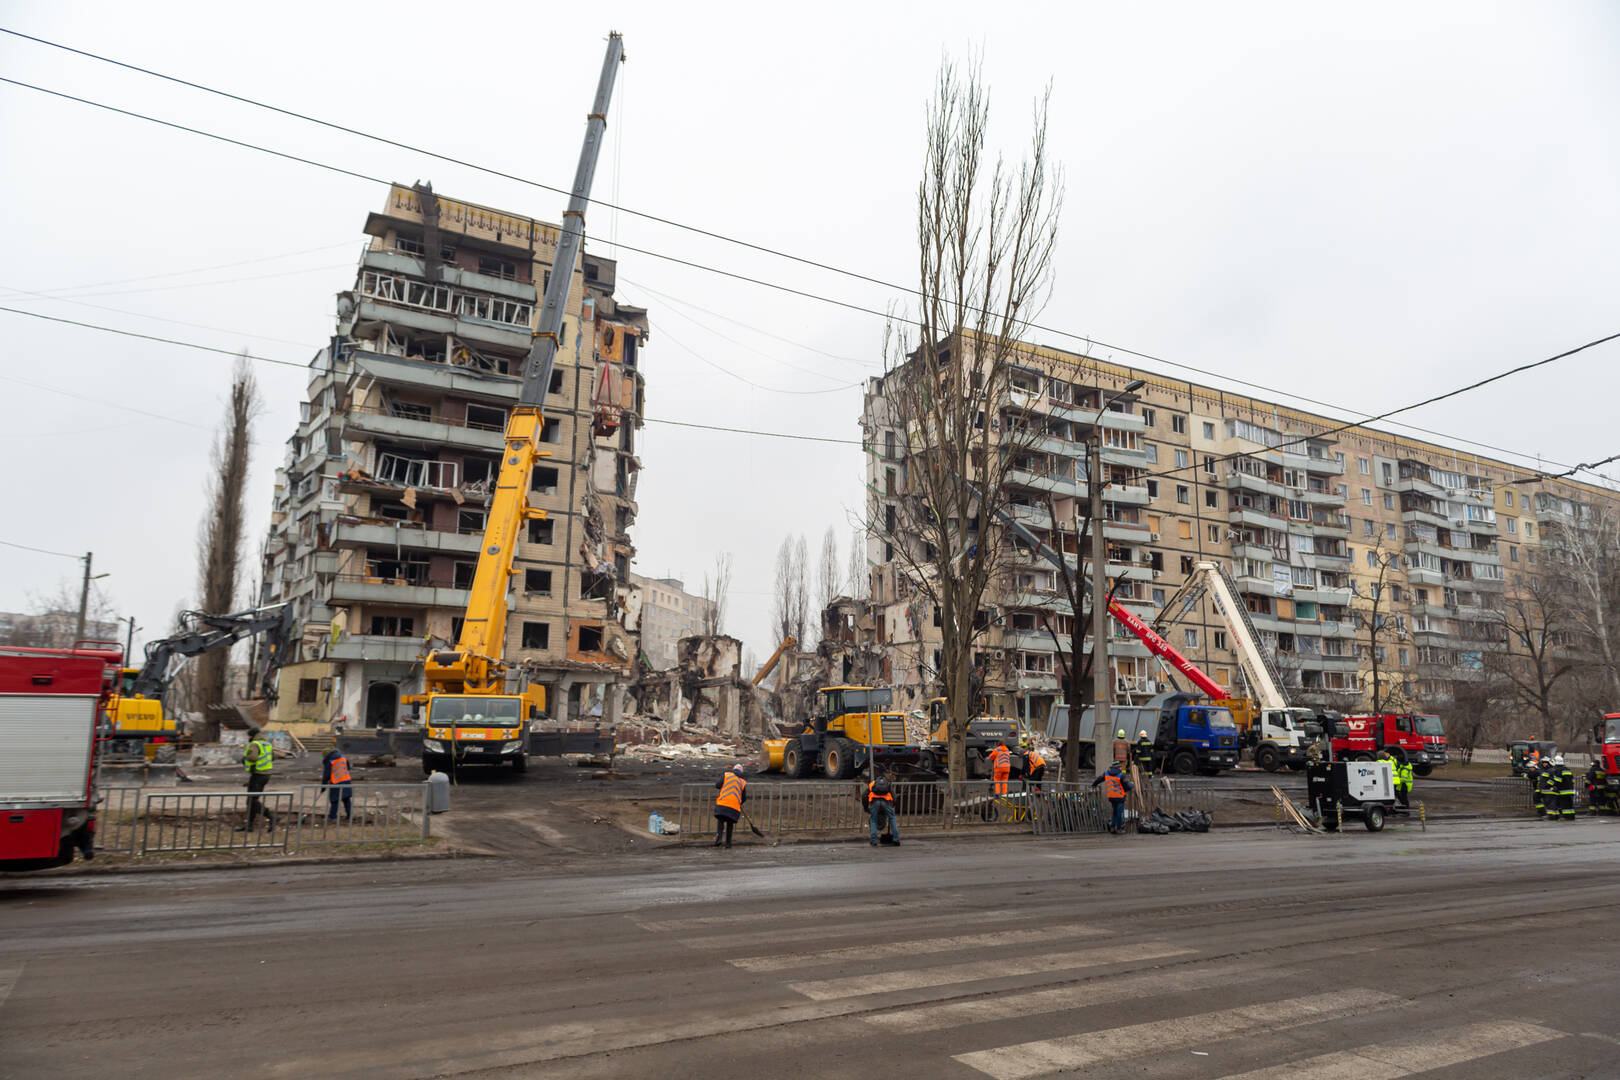 The aftermath of a devastating Russian missile strike on Jan. 14, 2023, in Dnipro. Photo courtesy of Caritas Ukraine.